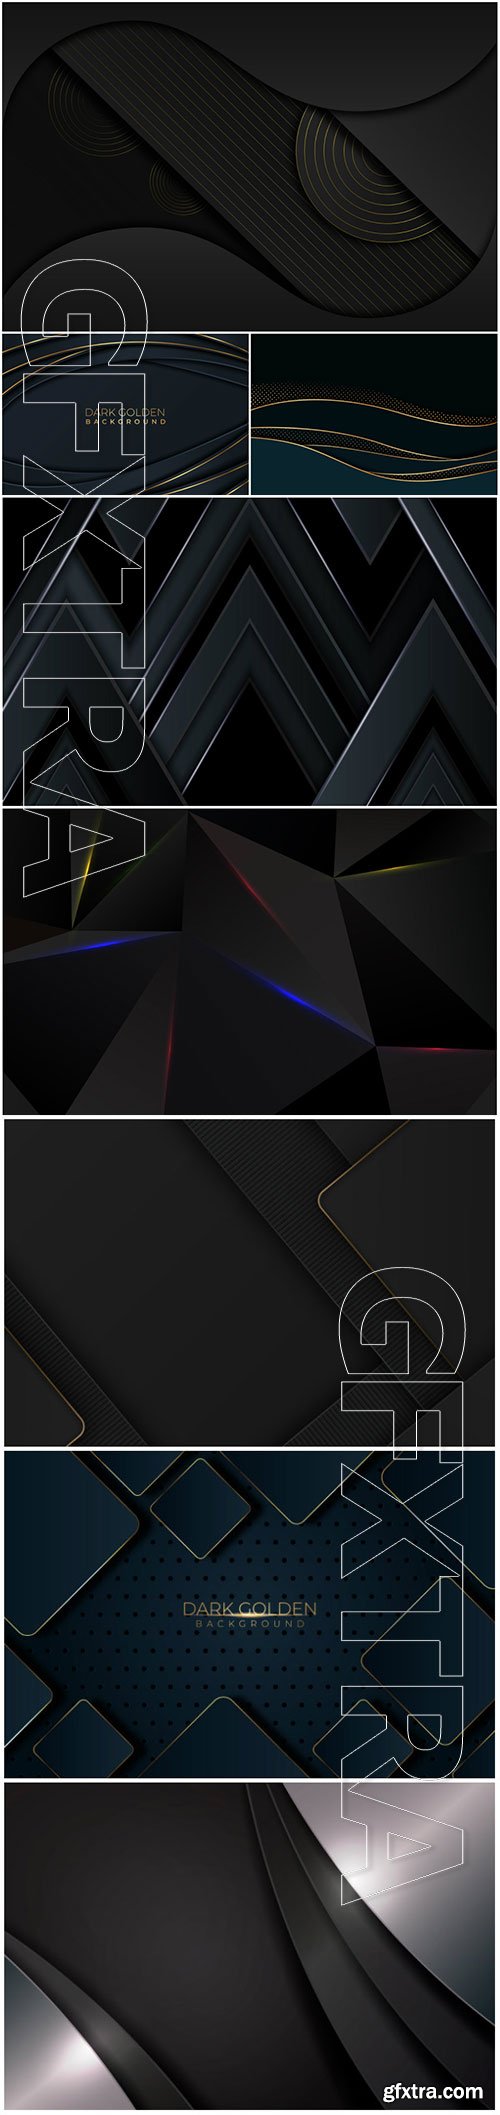 Luxury abstract backgrounds in vector # 9